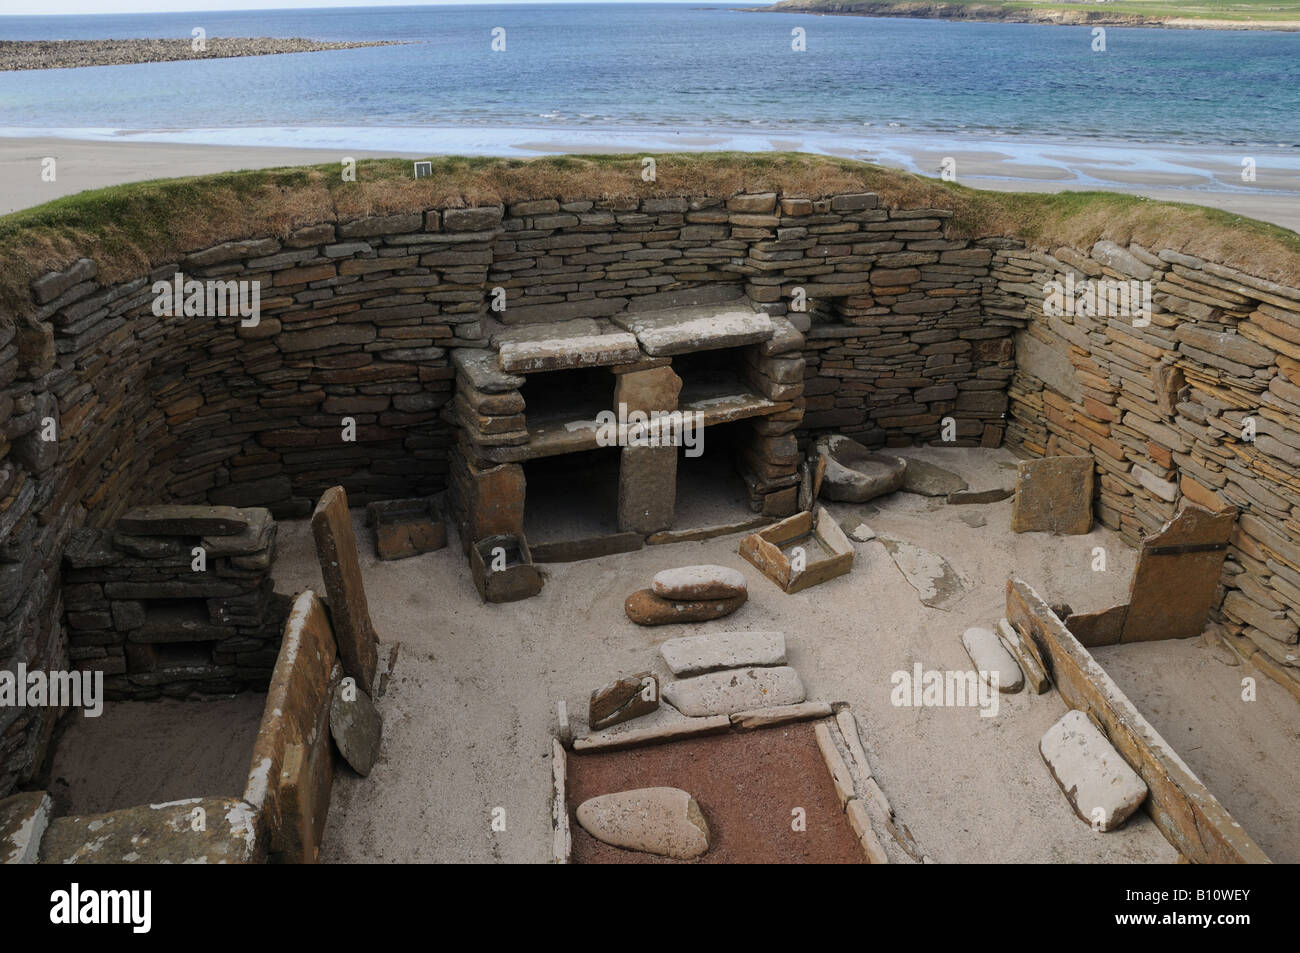 Skara Brae on Orkney Island in Scotland is a Neolithic settlement by the Bay of Skaill. Stock Photo